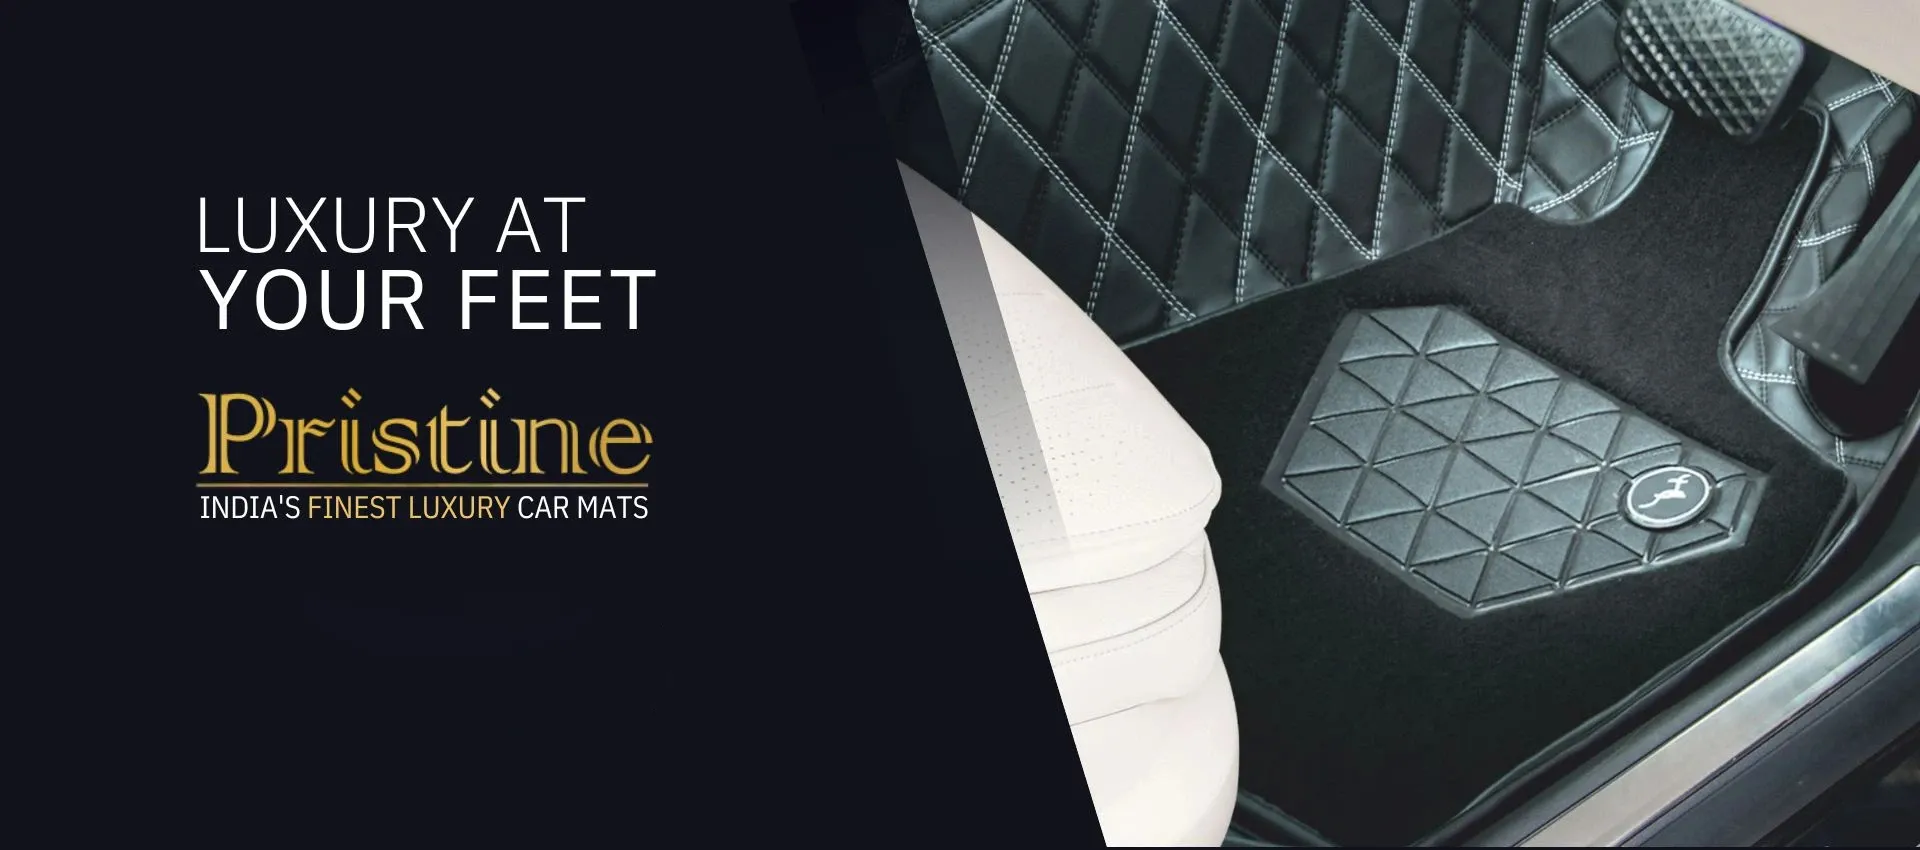 top gear pristine series luxury car mats 4d mats homepage banner image